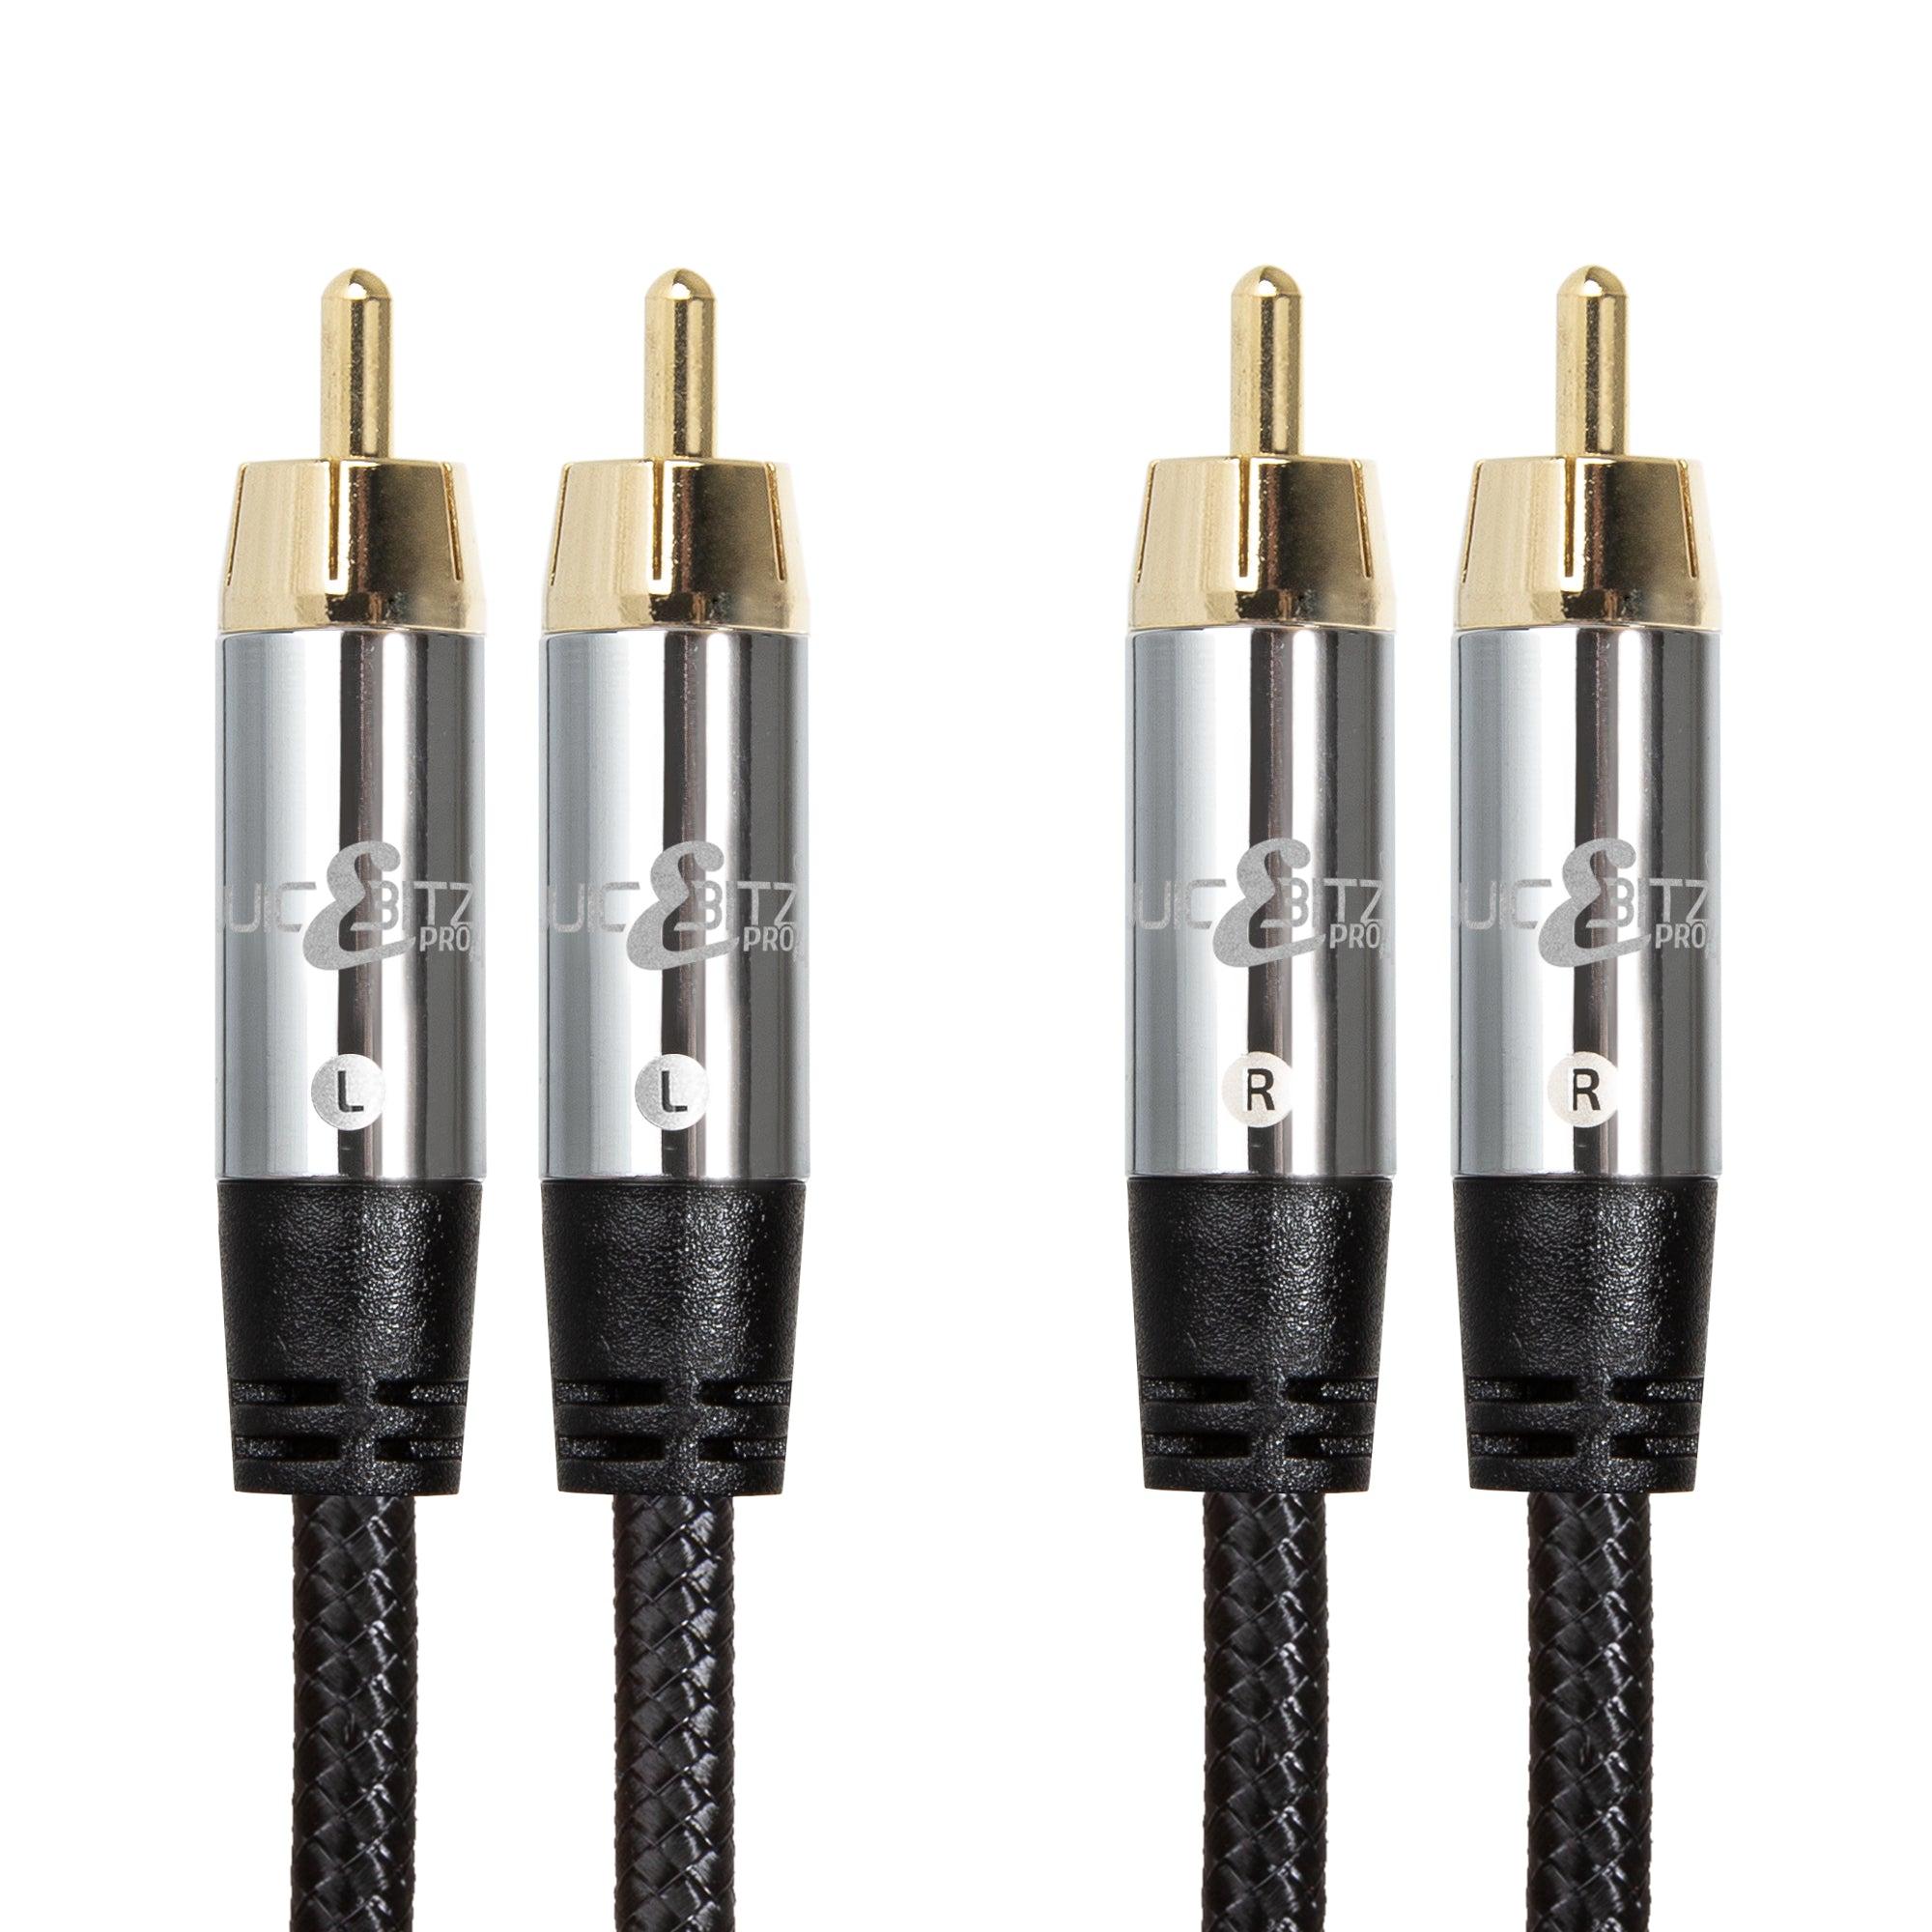 2 RCA - 4 RCA (7M) cable Gold - THICK RCA Cable